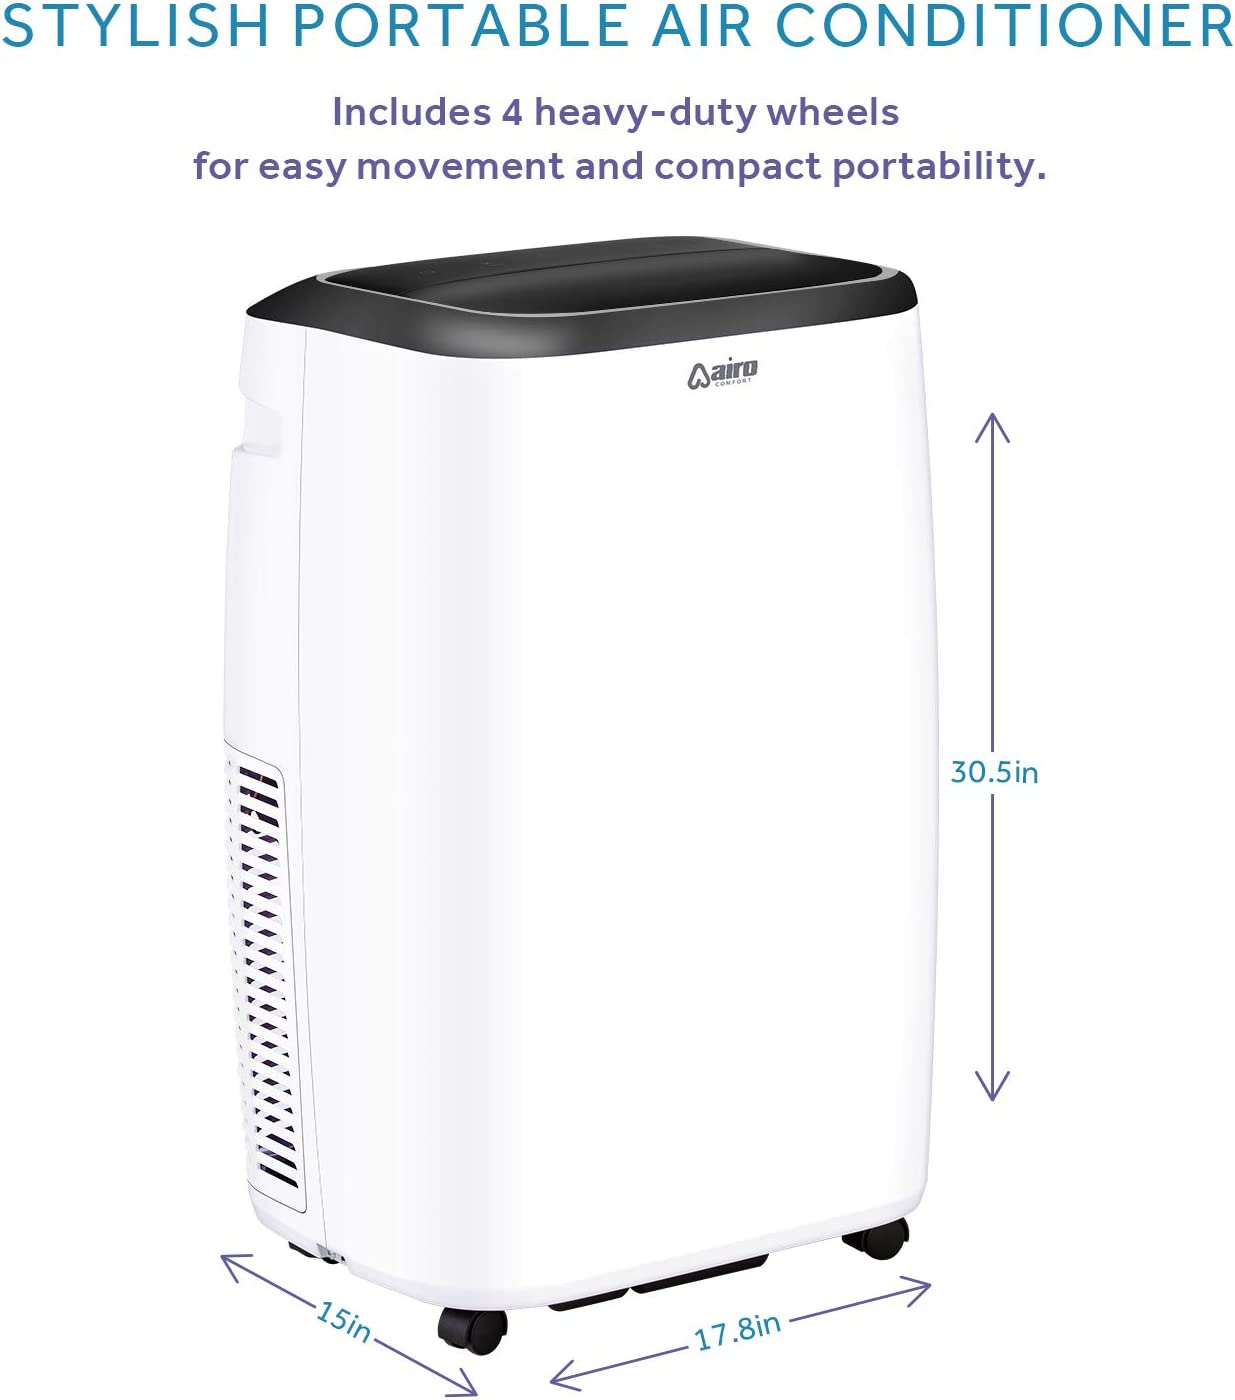 Airo Comfort Portable Air Conditioner 14,000 BTU - 8,600 SACC Quiet Air Conditioning Machine Cools Up to 500 Square Feet Room LED Display Auto and Dehumidifier Mode with Remote Control - image 2 of 9